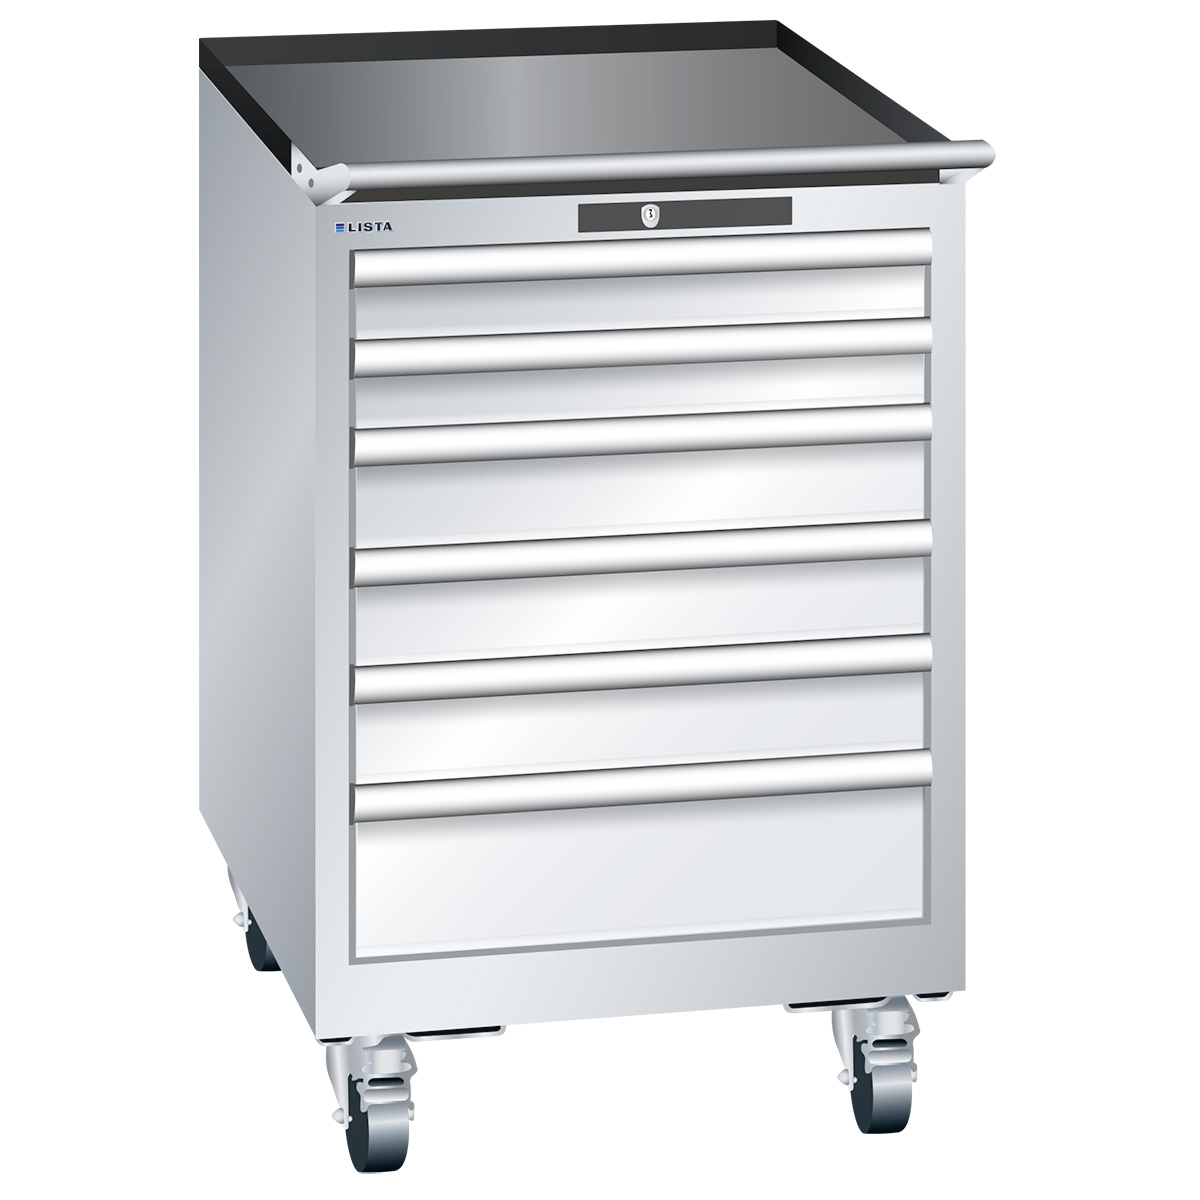 Lista drawer cabinet 27 x 36 E with castors, 5 drawers, light gray, Key Lock, height 890 mm